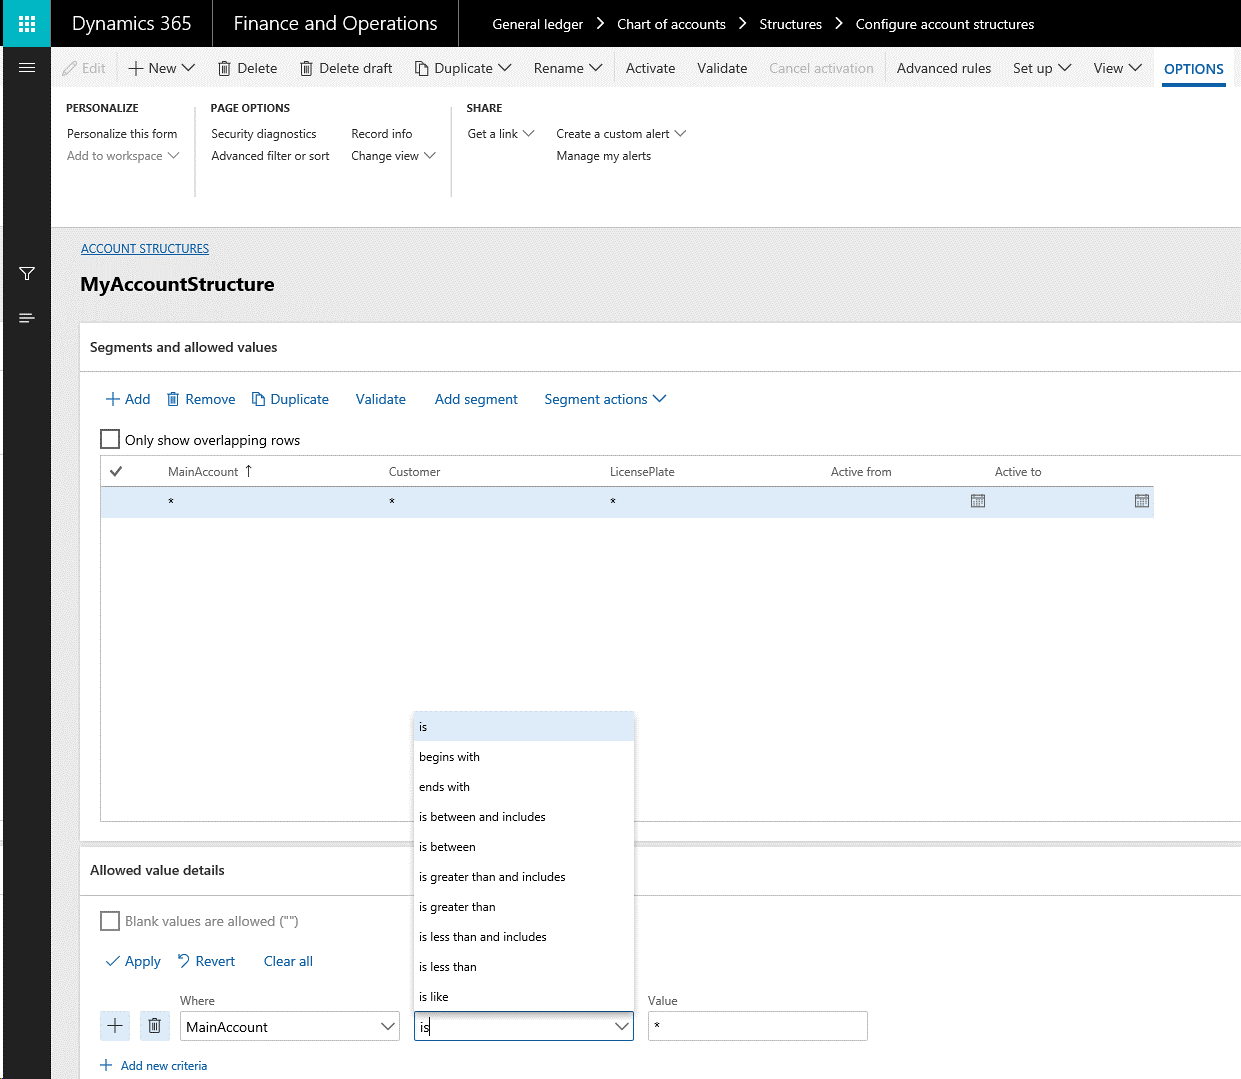 Constraint builder on the Account structures page.